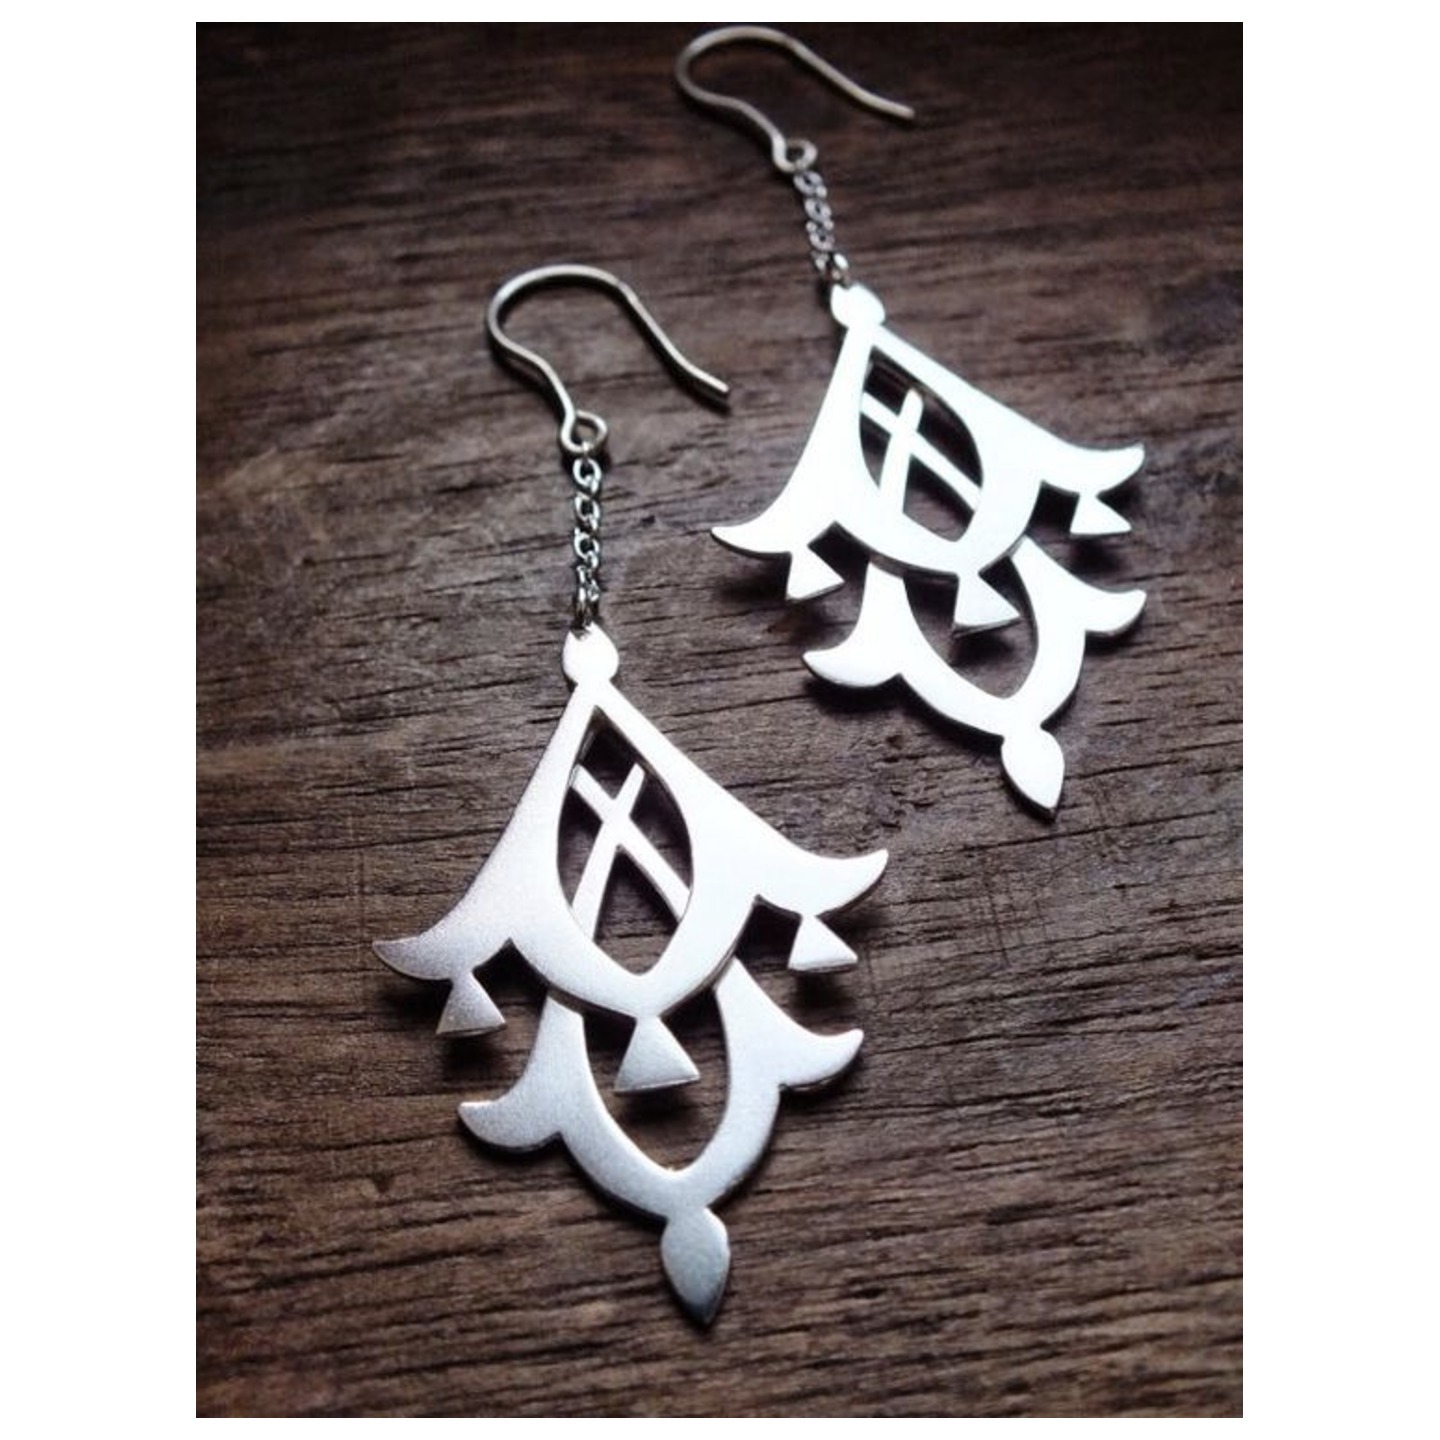 Contemporary Earring 0230